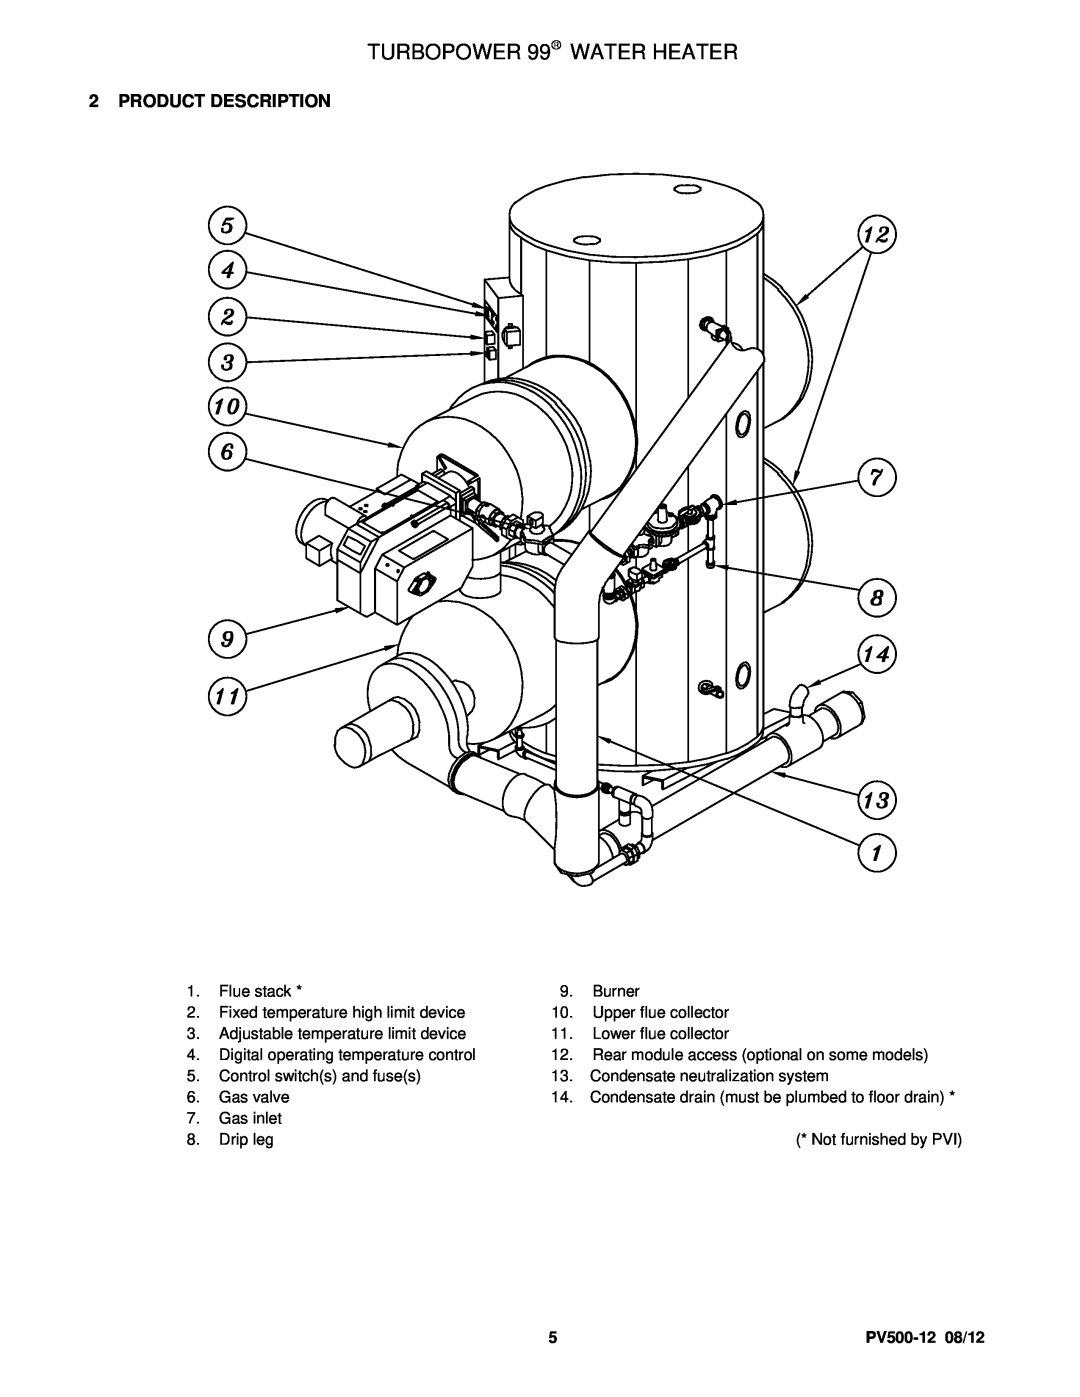 PVI Industries manual TURBOPOWER 99 WATER HEATER, Product Description, PV500-1208/12 